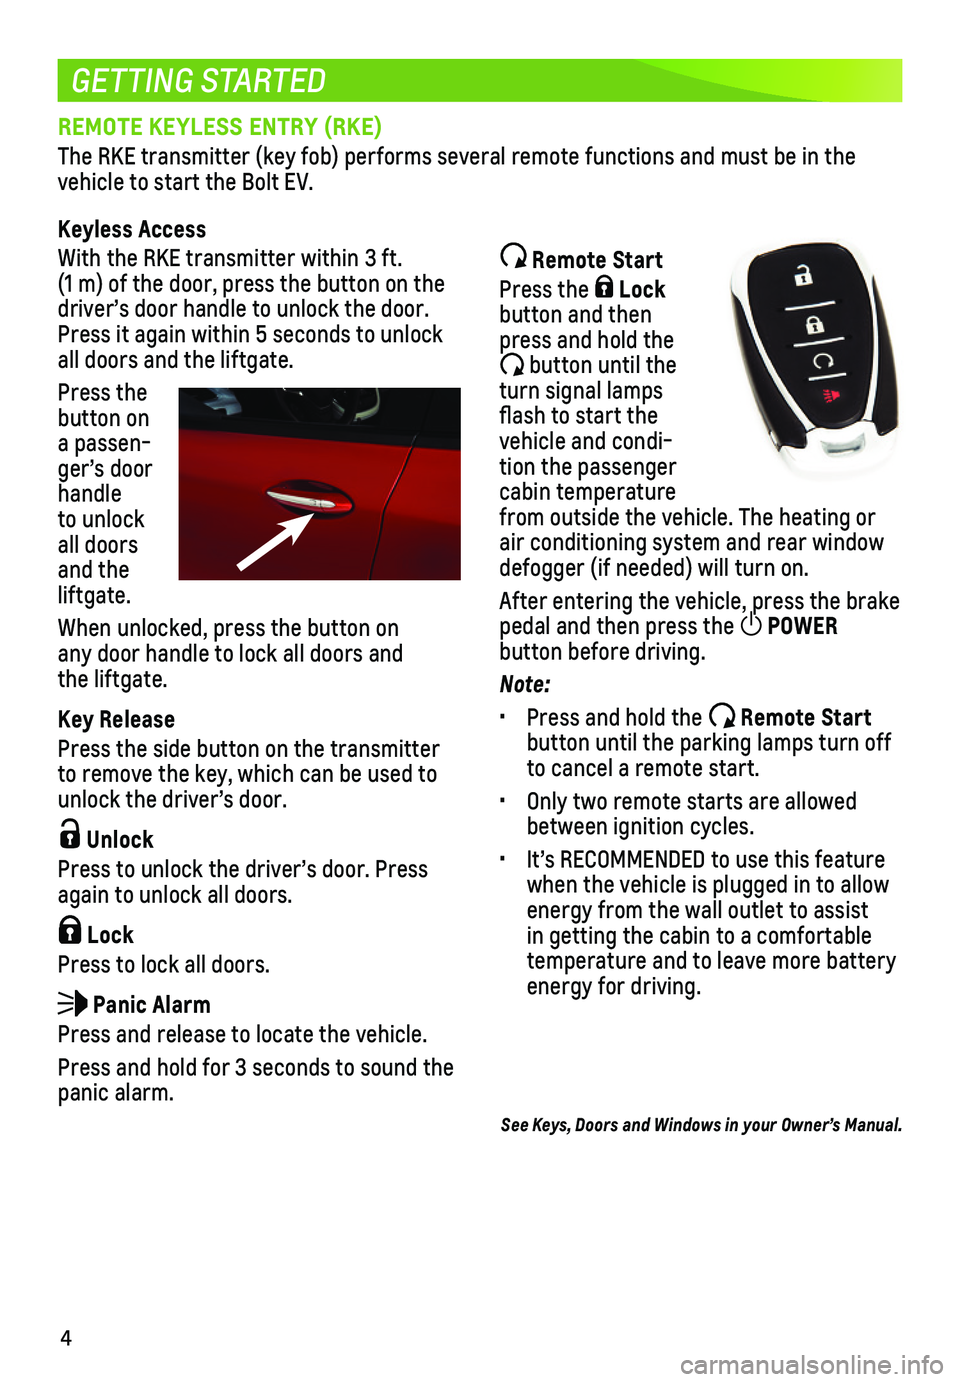 CHEVROLET BOLT EV 2019  Get To Know Guide 4
GETTING STARTED
REMOTE KEYLESS ENTRY (RKE)
The RKE transmitter (key fob) performs several remote functions and mu\
st be in the vehicle to start the Bolt EV.
Keyless Access
With the RKE transmitter 